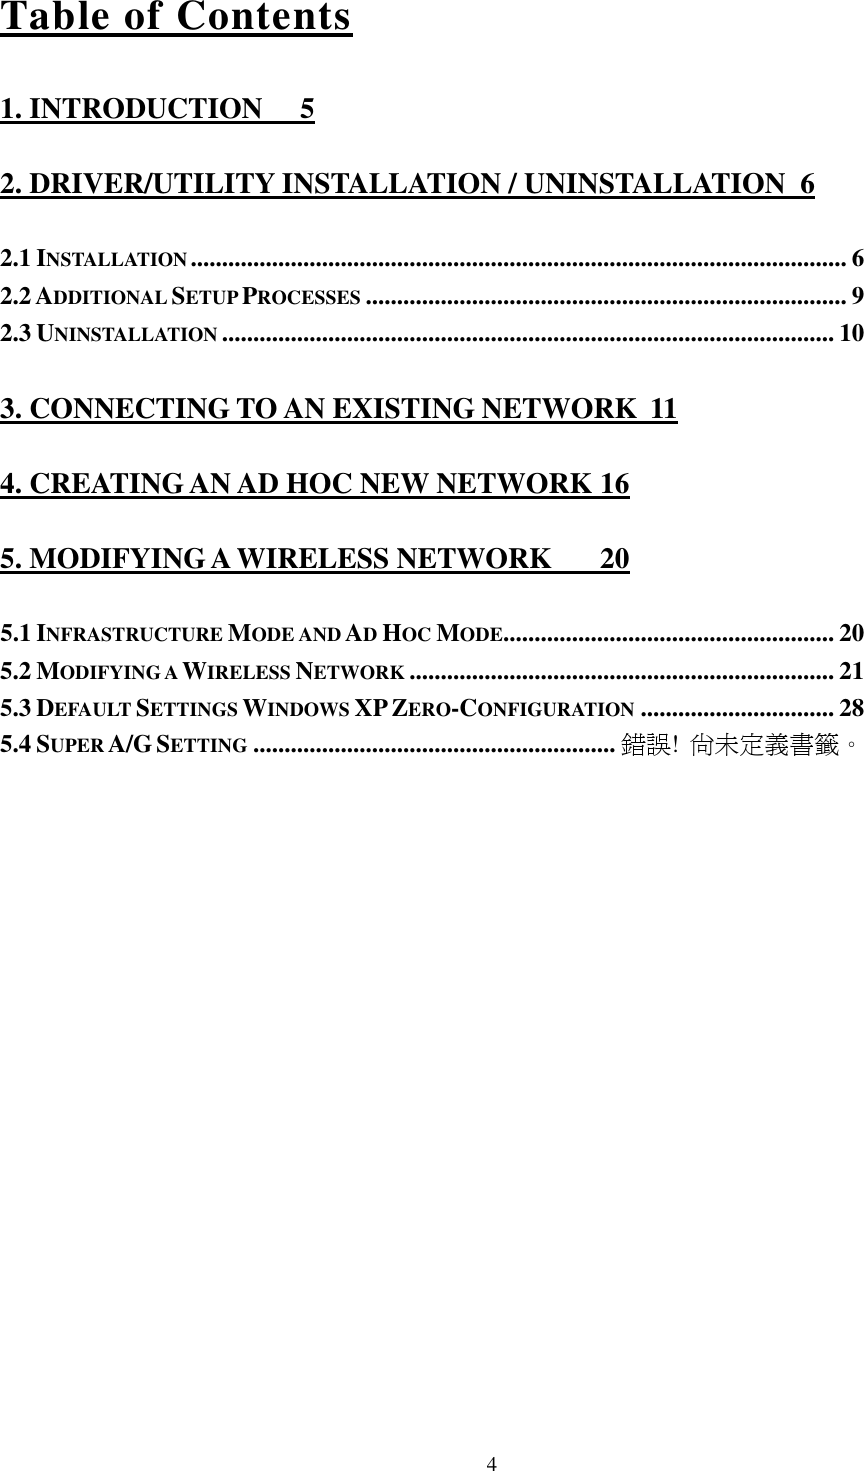   4 Table of Contents 1. INTRODUCTION  5 2. DRIVER/UTILITY INSTALLATION / UNINSTALLATION  6 2.1 INSTALLATION......................................................................................................... 6 2.2 ADDITIONAL SETUP PROCESSES............................................................................. 9 2.3 UNINSTALLATION.................................................................................................. 10 3. CONNECTING TO AN EXISTING NETWORK  11 4. CREATING AN AD HOC NEW NETWORK 16 5. MODIFYING A WIRELESS NETWORK  20 5.1 INFRASTRUCTURE MODE AND AD HOC MODE..................................................... 20 5.2 MODIFYING A WIRELESS NETWORK.................................................................... 21 5.3 DEFAULT SETTINGS WINDOWS XP ZERO-CONFIGURATION............................... 28 5.4 SUPER A/G SETTING.......................................................... 錯誤! 尚未定義書籤。 